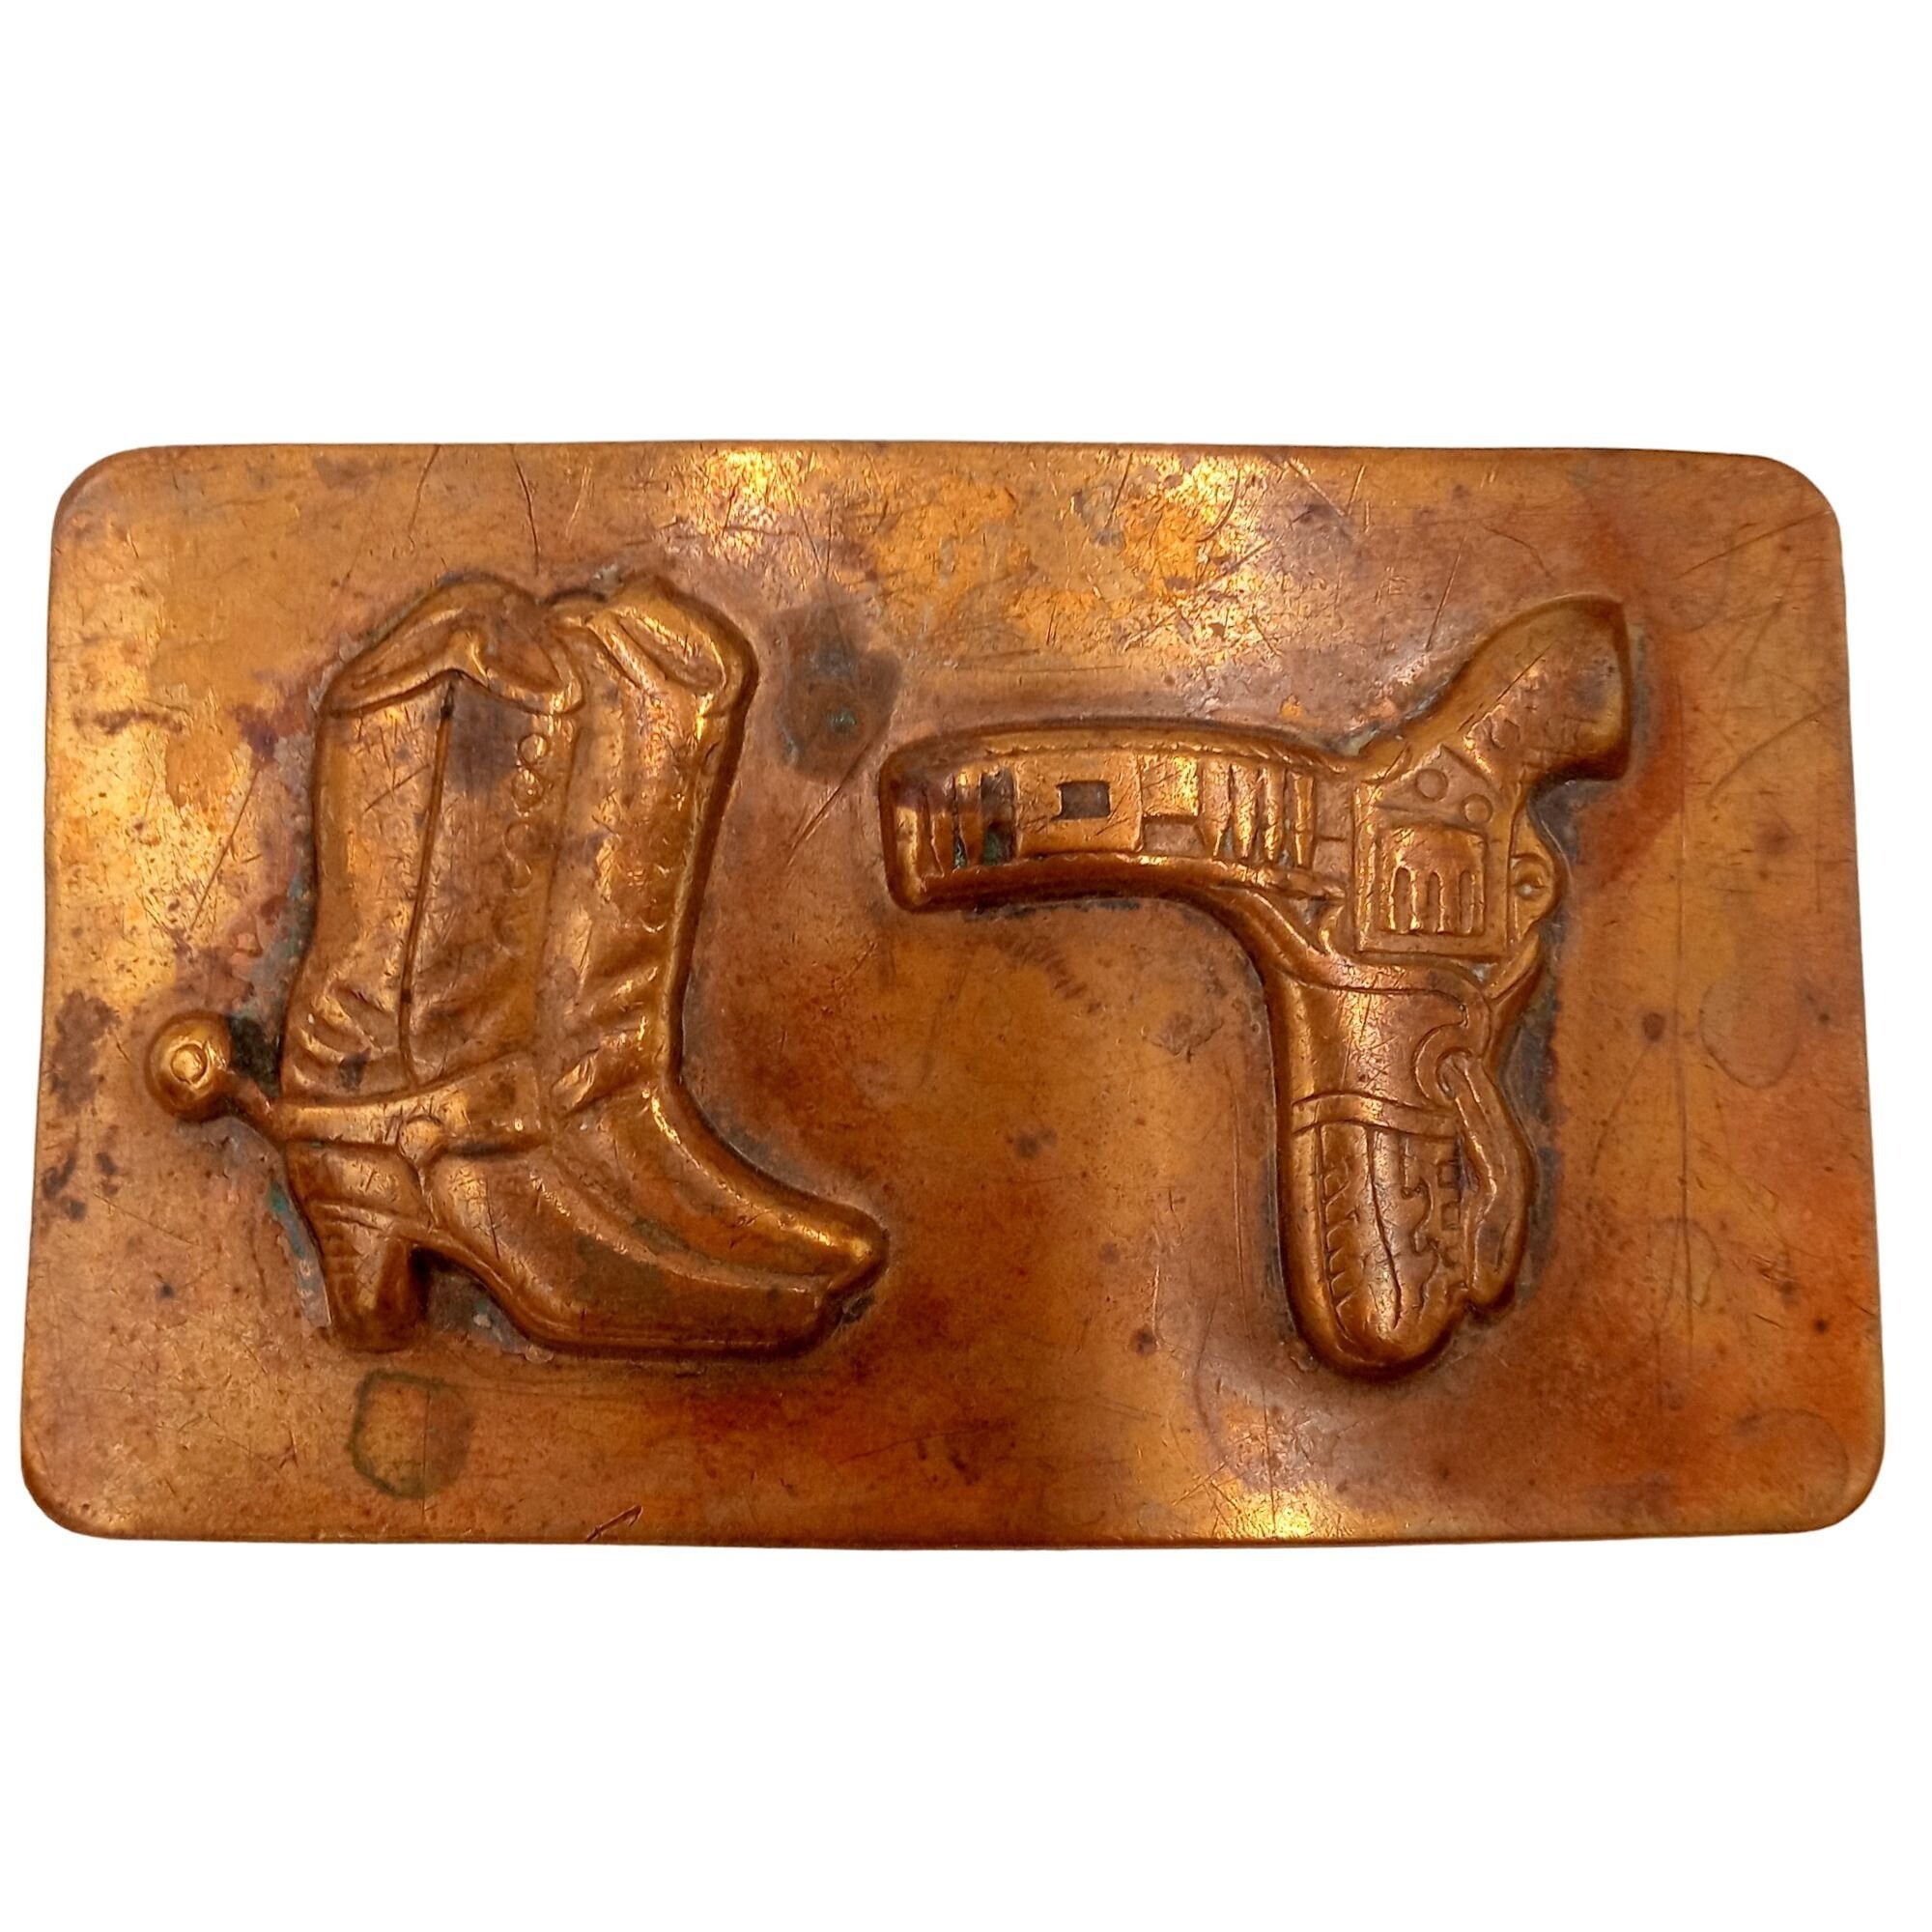 Unkwn Cowboy Boots Pistol Belt Buckle Vintage Country Western Gun Size ONE SIZE - 1 Preview